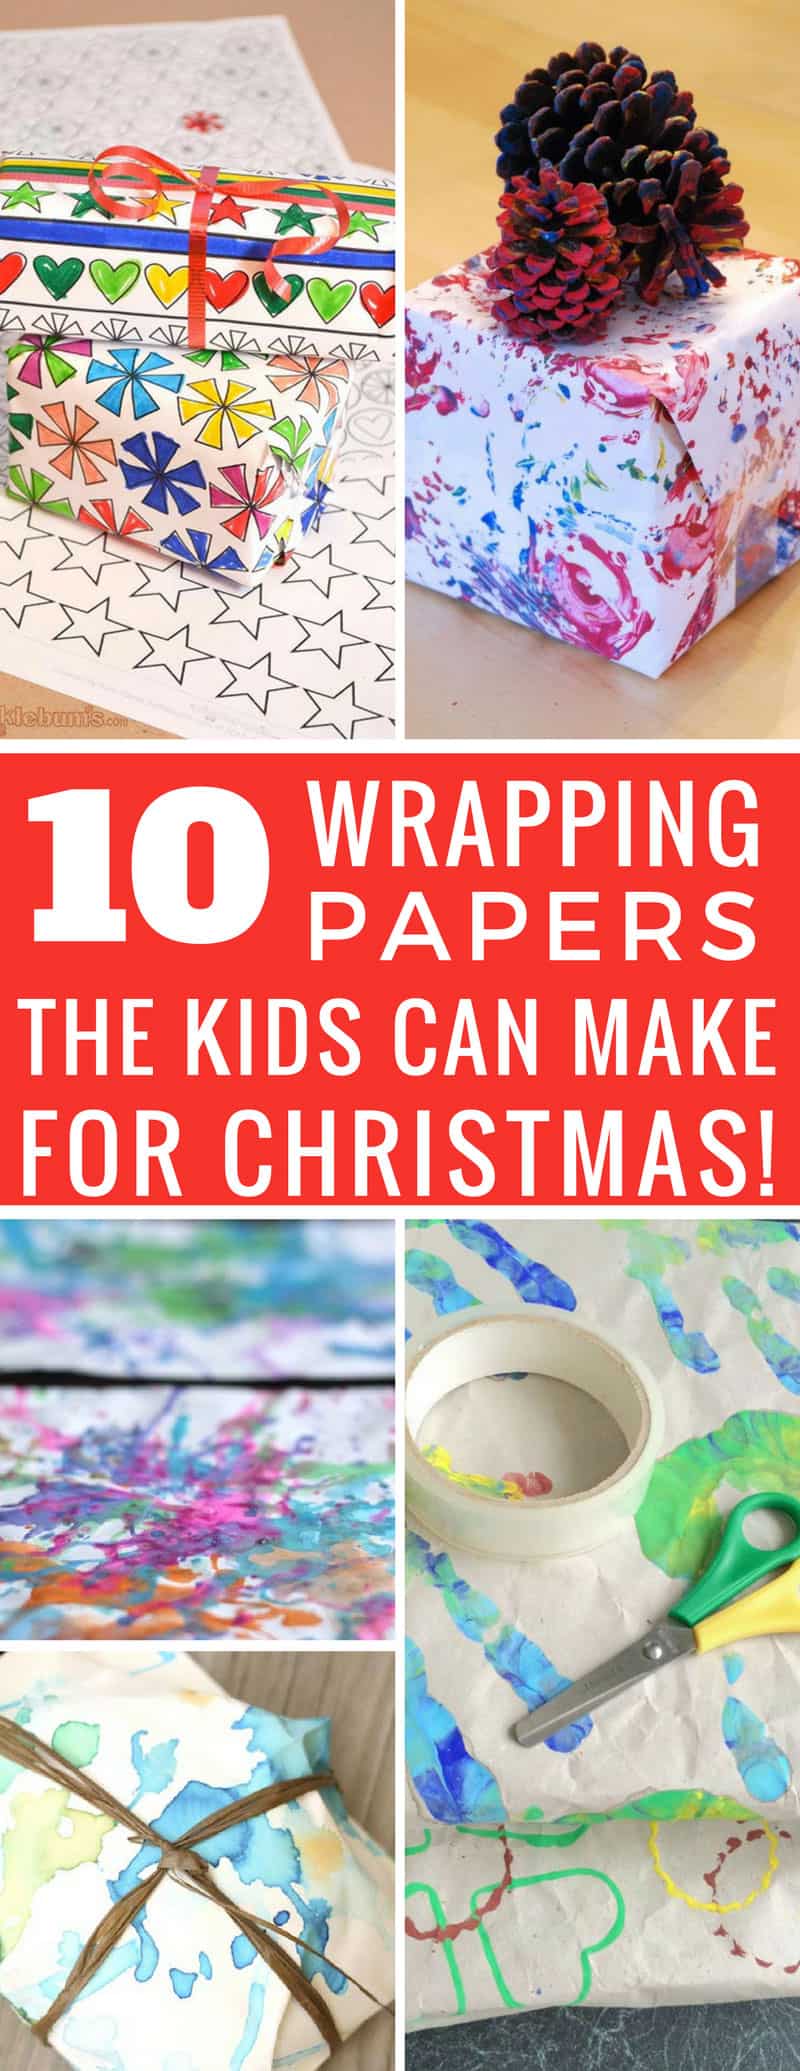 How fun are these homemade wrapping paper ideas! The kids will have a blast making gift wrap this year! Thanks for sharing!